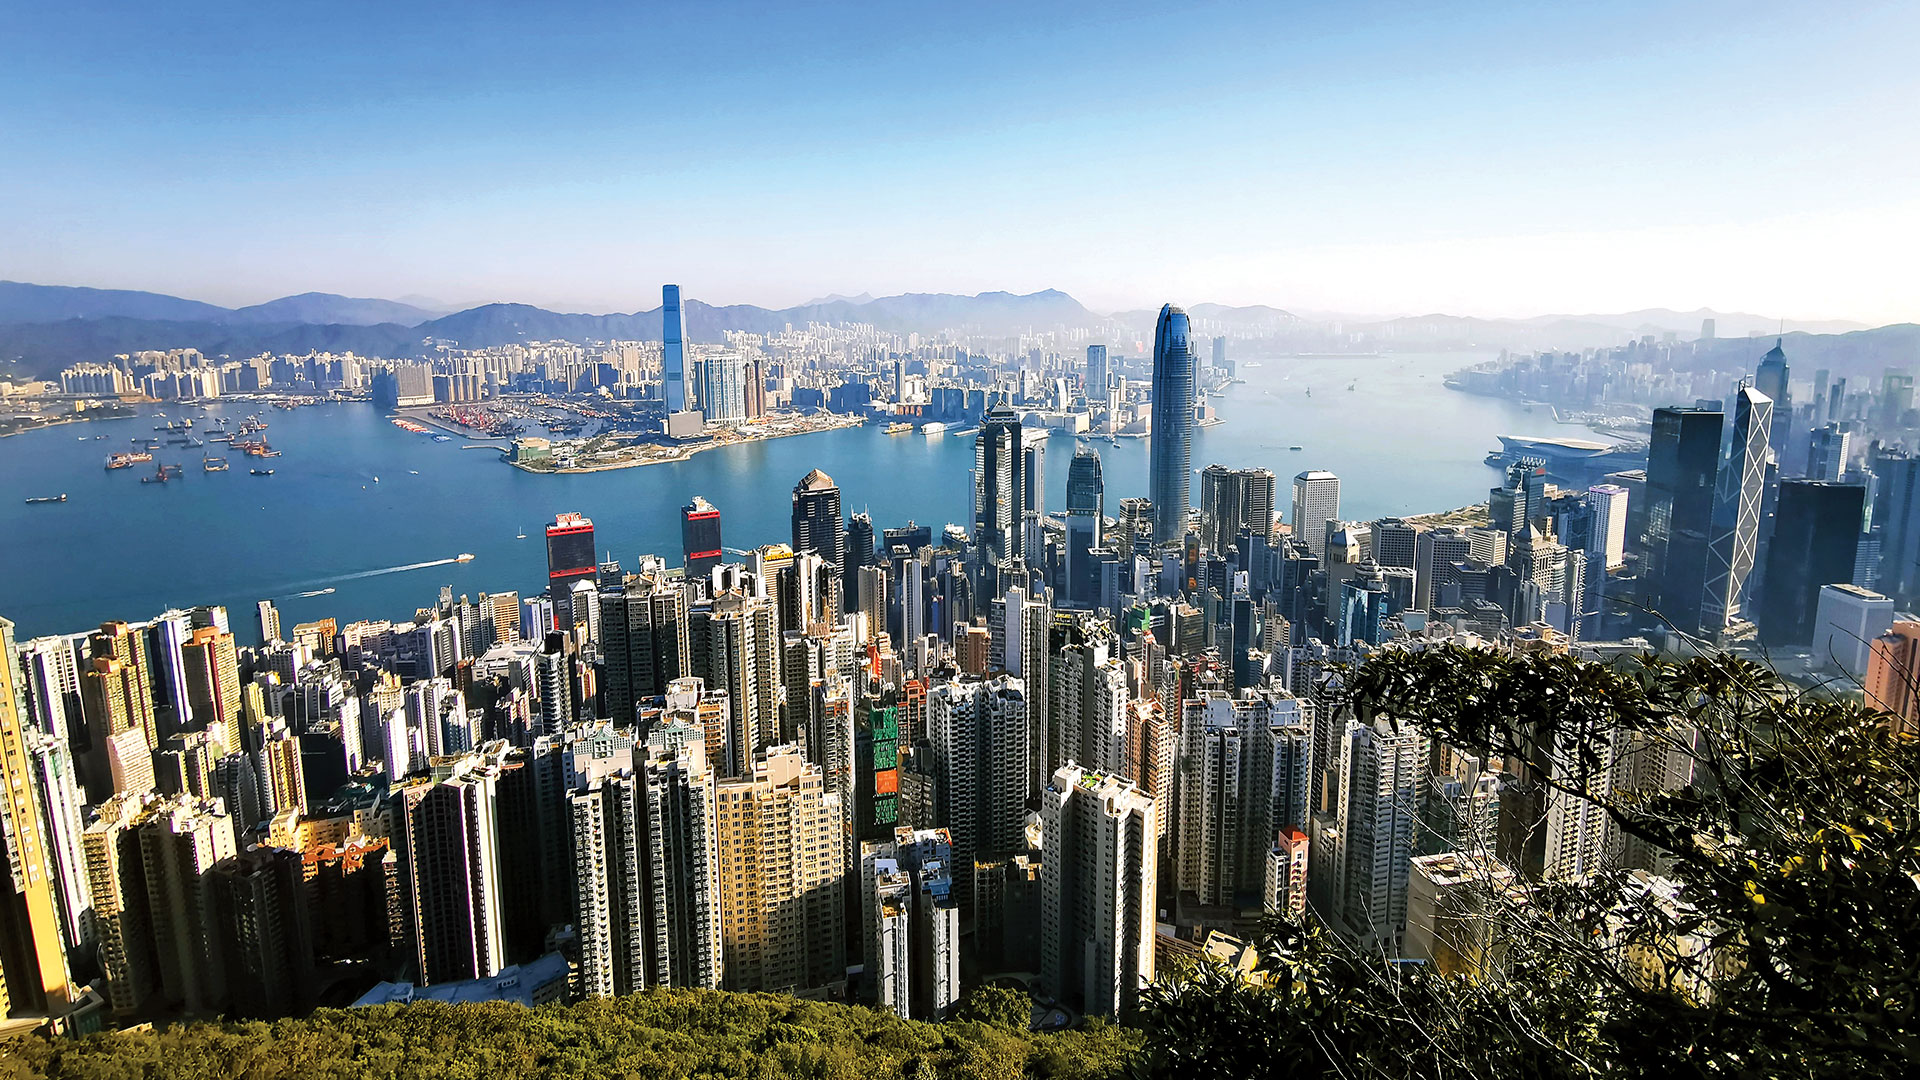 Hail Hong Kong: Resilient and resurgent, Asia’s world city still commands attention and captivates the soul